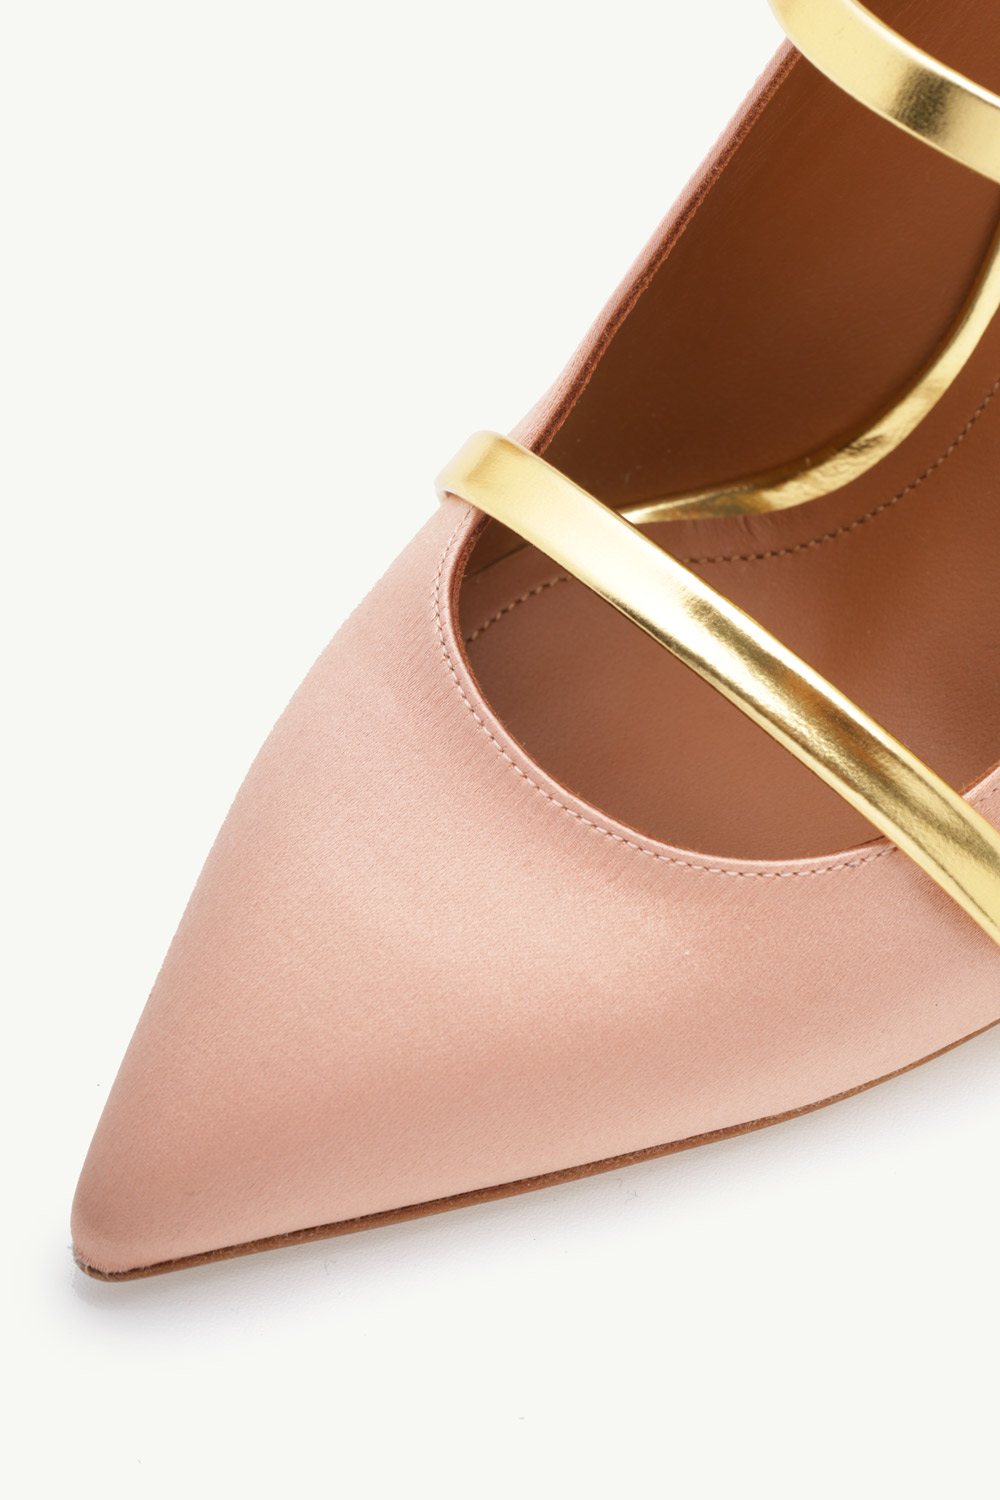 MALONE SOULIERS Maureen Pumps 70mm in Blush Satin/Gold 4